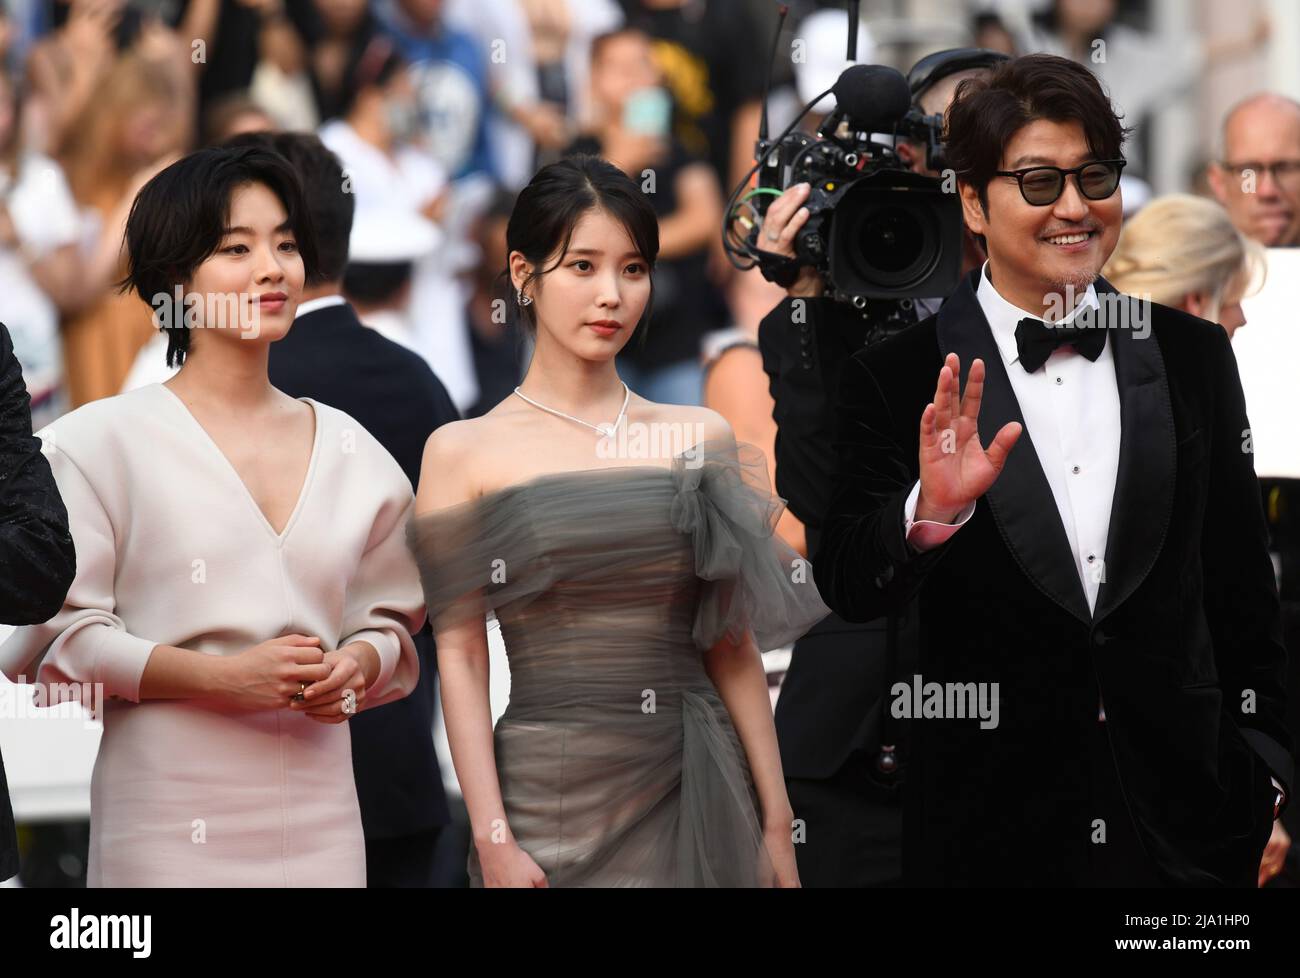 May 26th, 2022. Cannes, France. Lee Joo-Young, Choi Hee-jin and Song Kang-ho attending the Broker Premiere, part of the 75th Cannes Film Festival, Palais de Festival, Cannes. Credit: Doug Peters/EMPICS/Alamy Live News Stock Photo